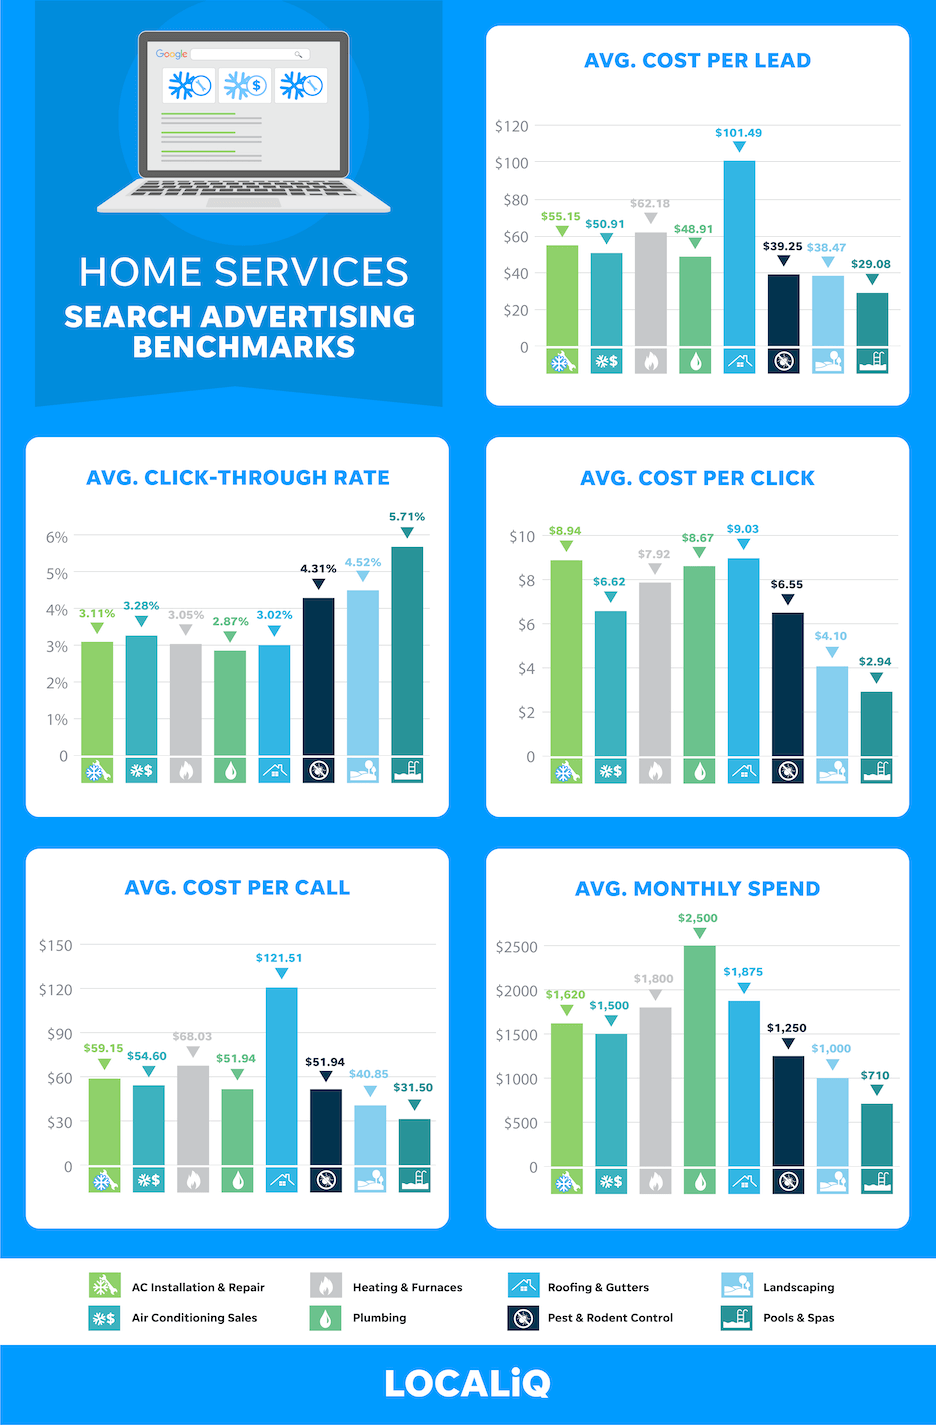 home services ppc advertising average results